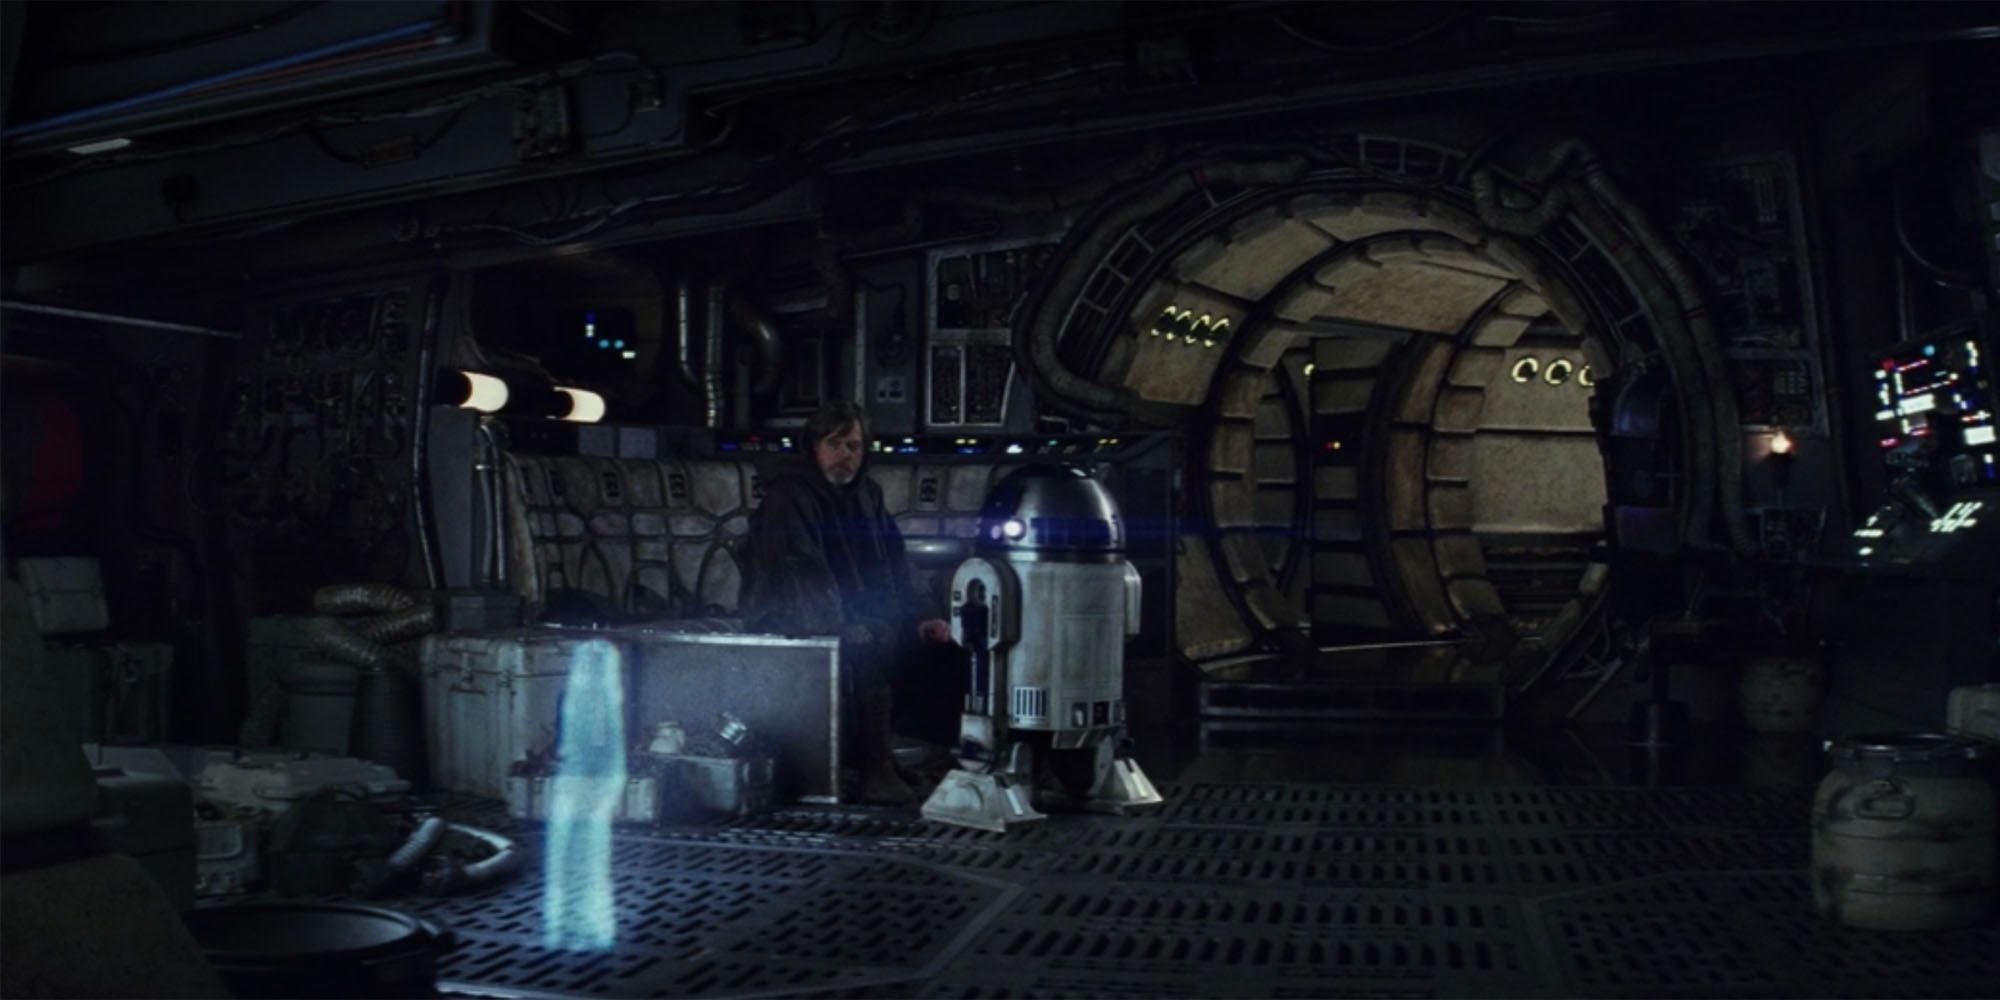 R2-D2 shows Luke Skywalker the hologram from A New Hope to try and convince him to return in Star Wars The Last Jedi